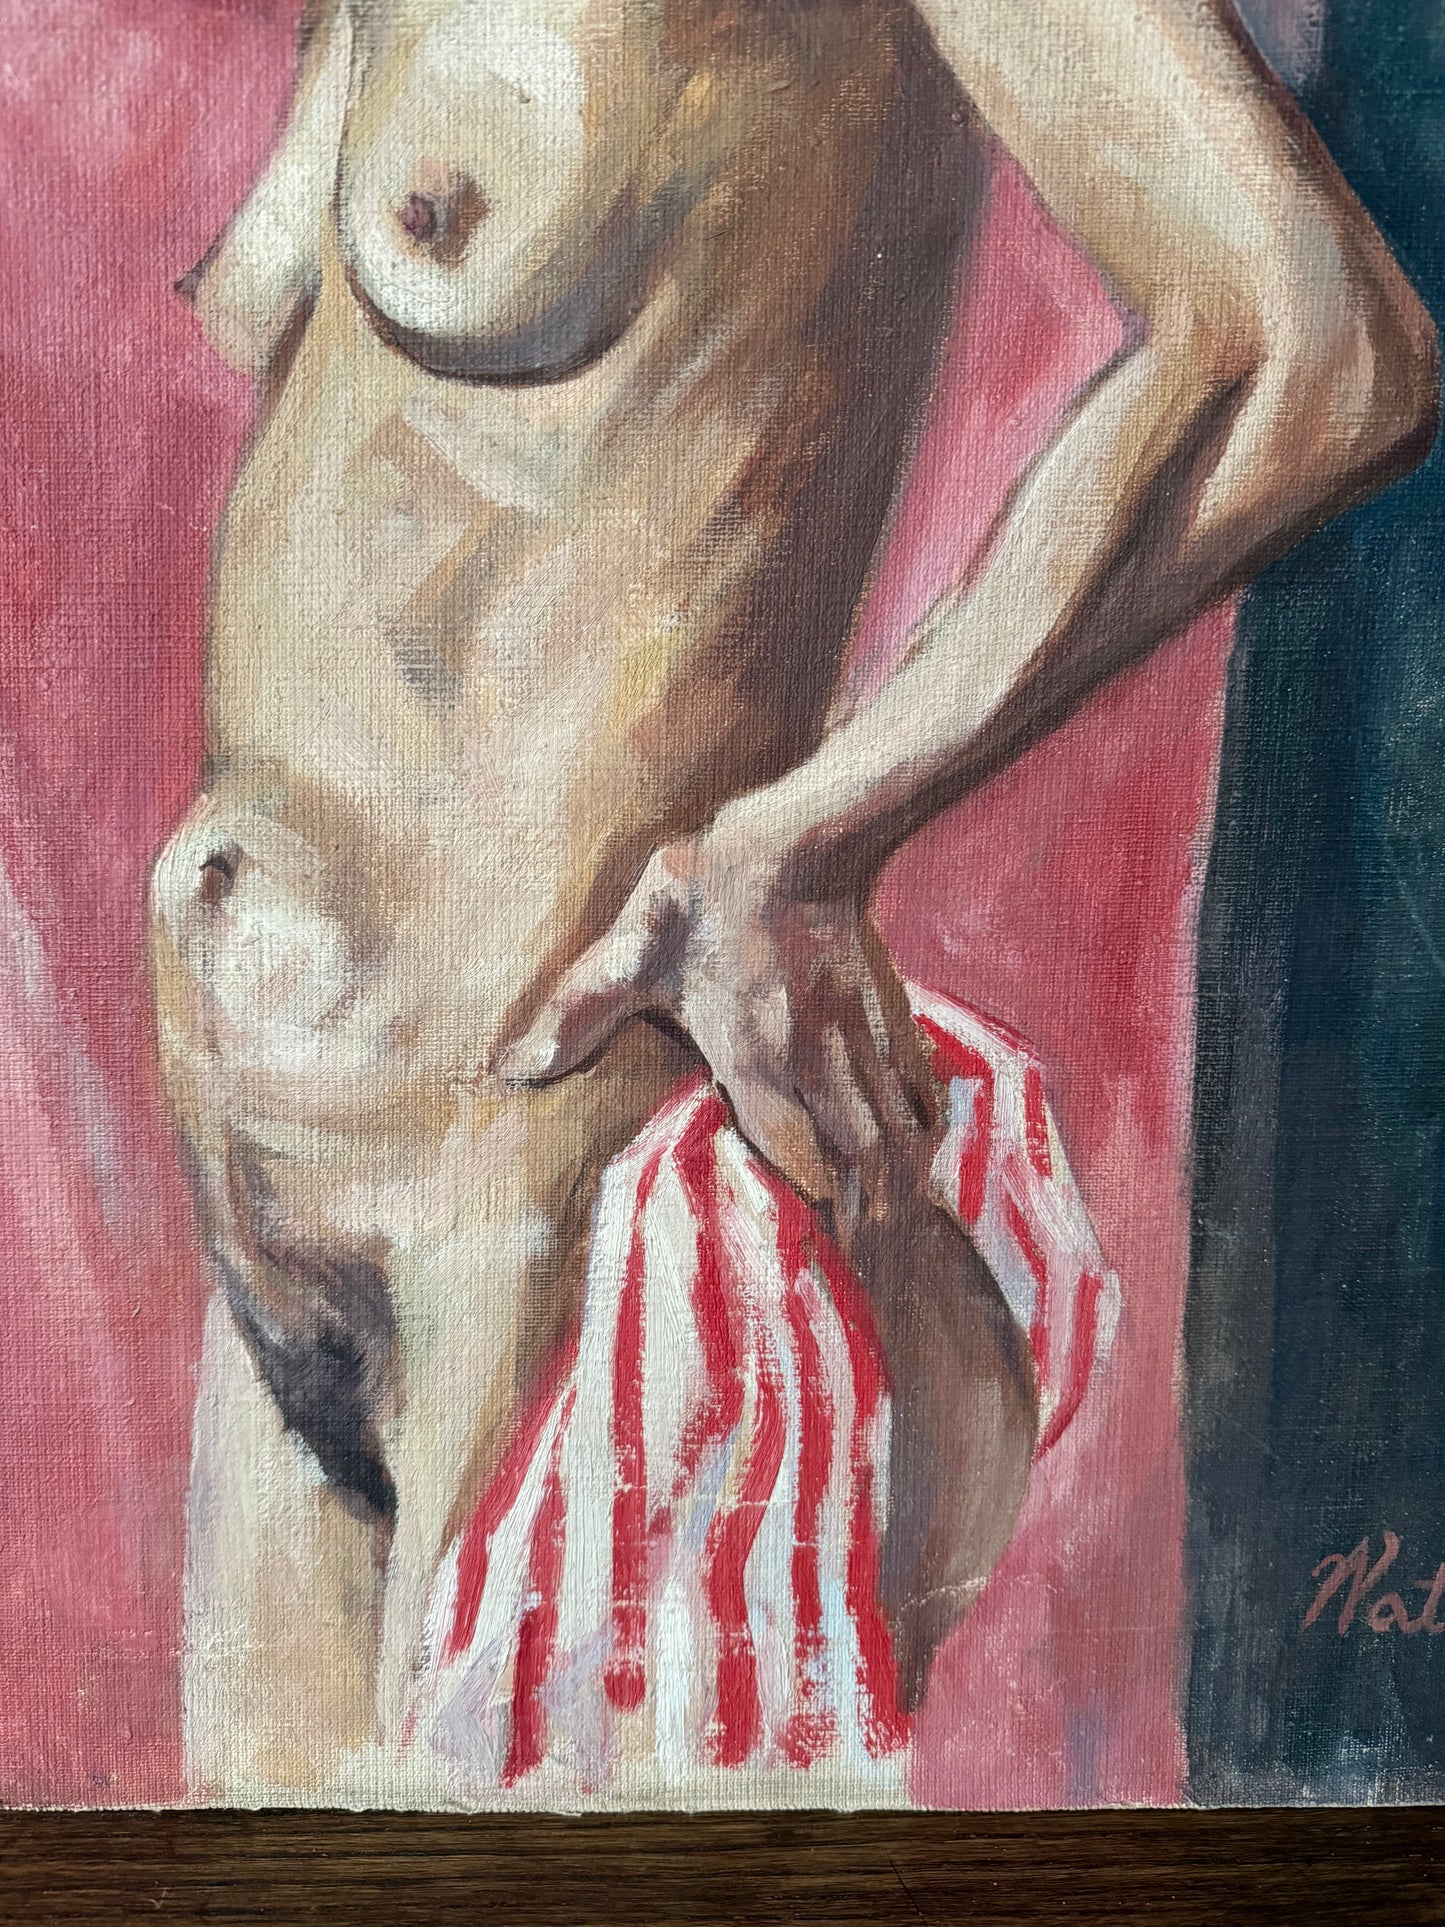 1940s Nude Painting of a Woman w/ Striped Towel Signed Waterman- 18x22”